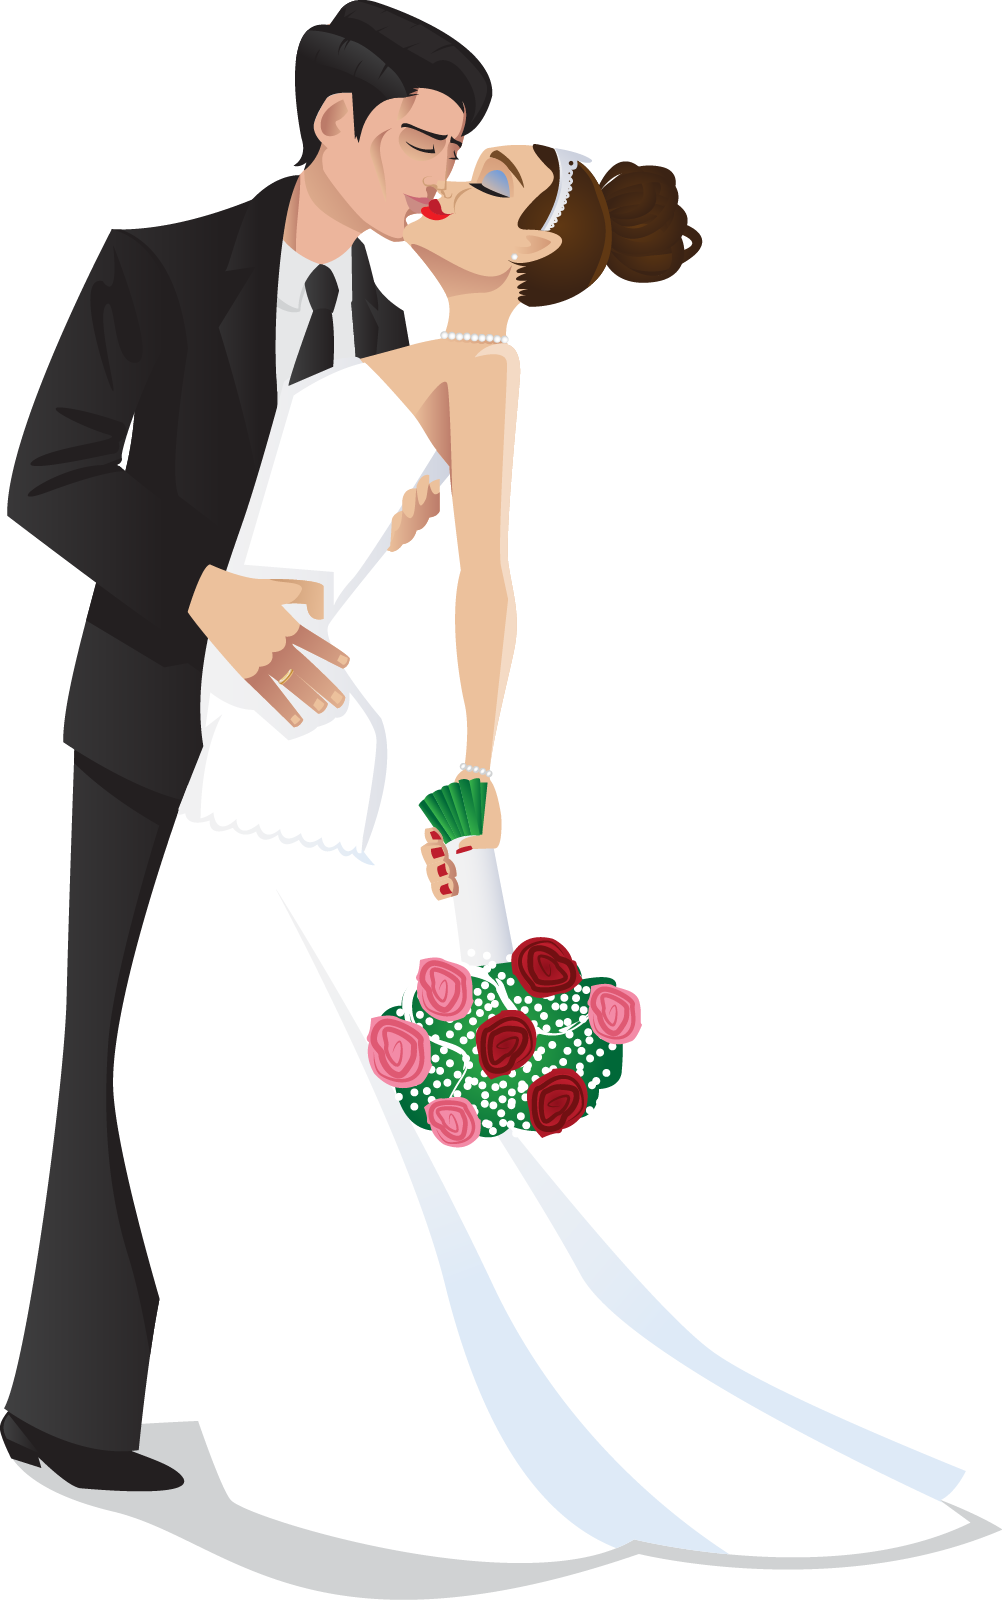 Bride and groom kiss wedding bride groom clipart the cliparts